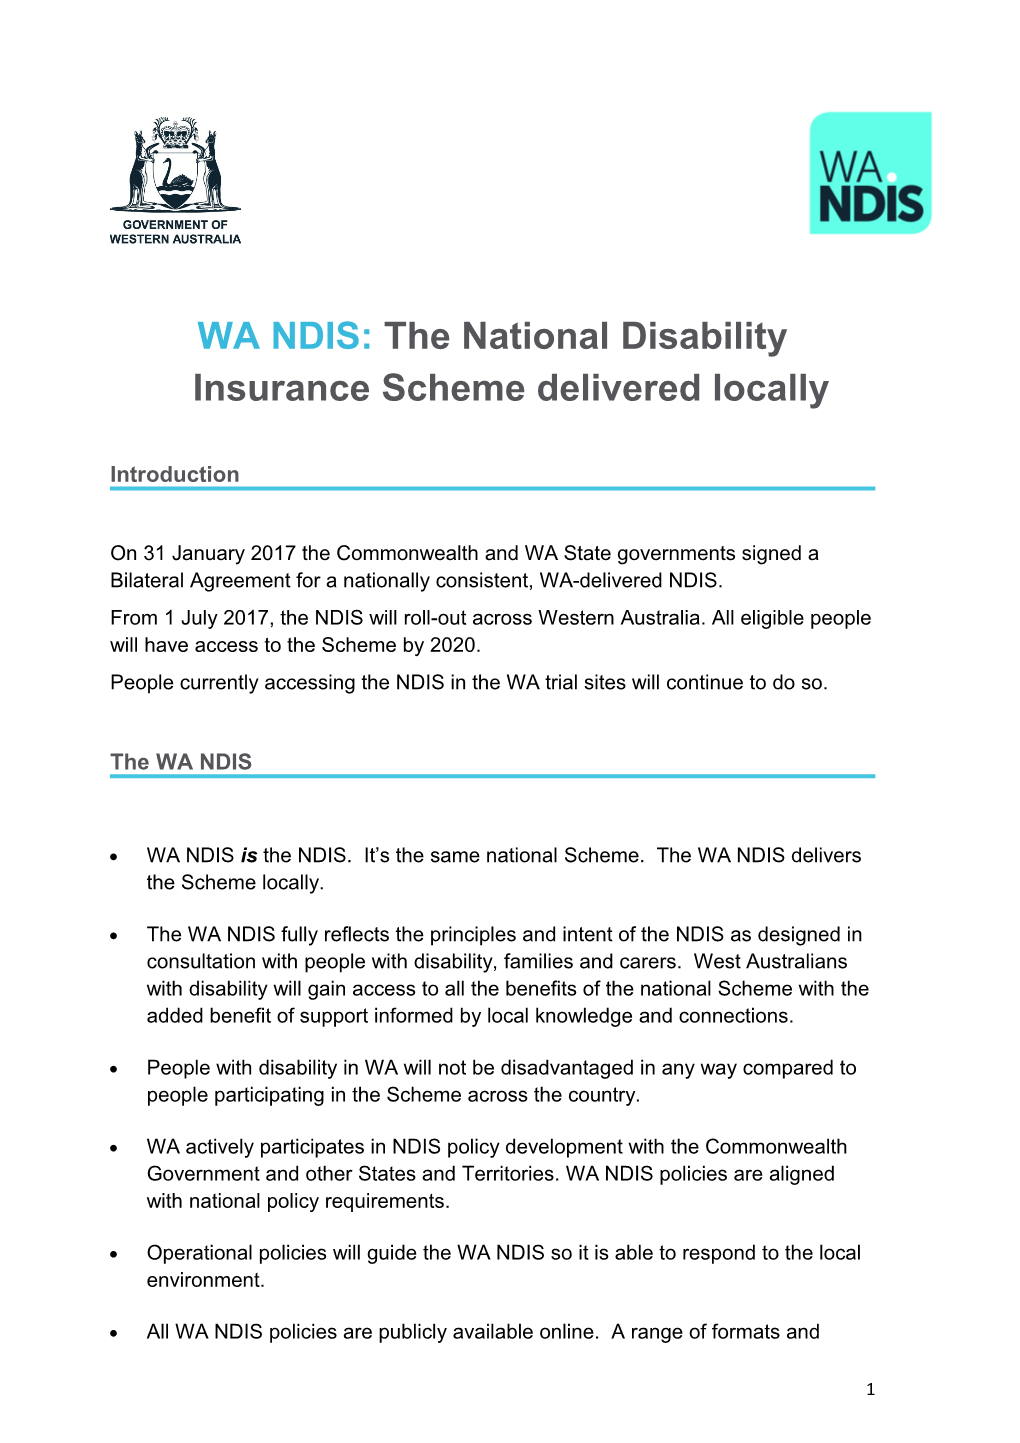 WA NDIS: the National Disability Insurance Scheme Delivered Locally